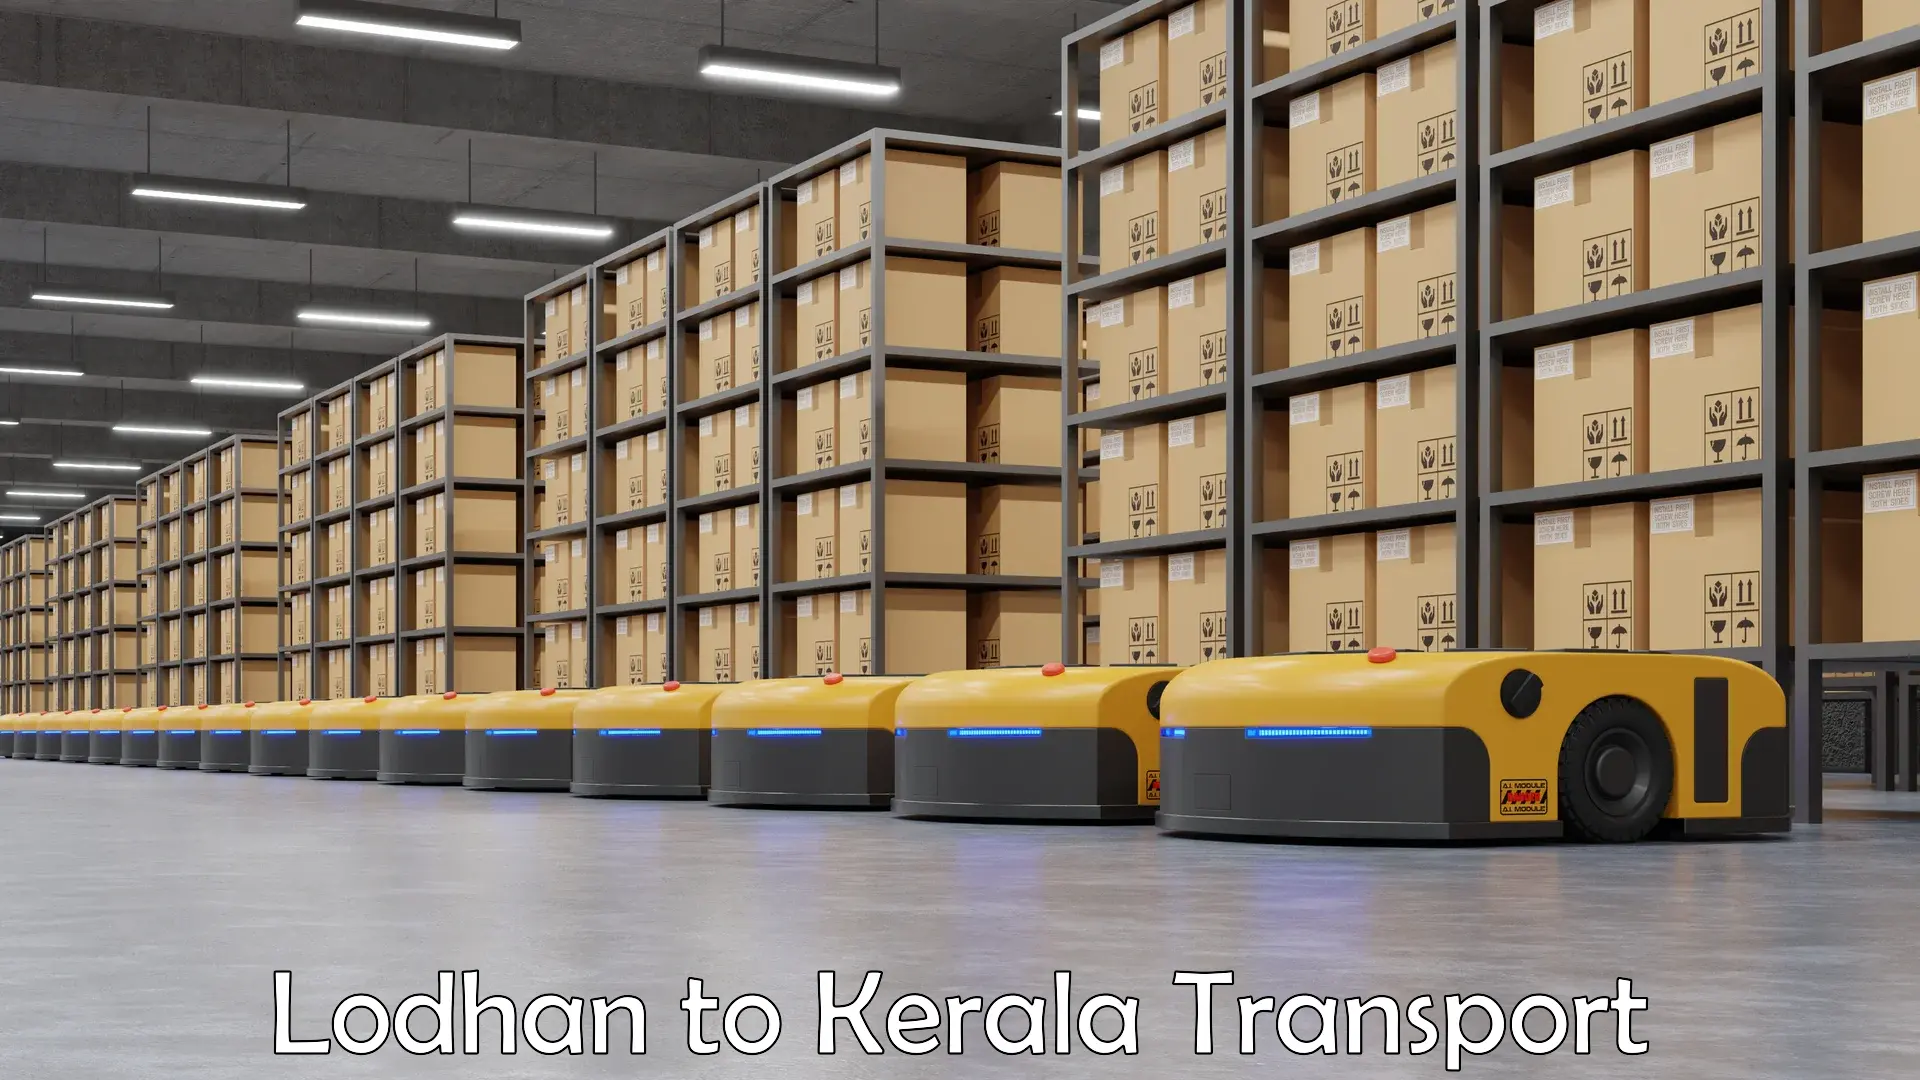 Goods delivery service Lodhan to Kerala